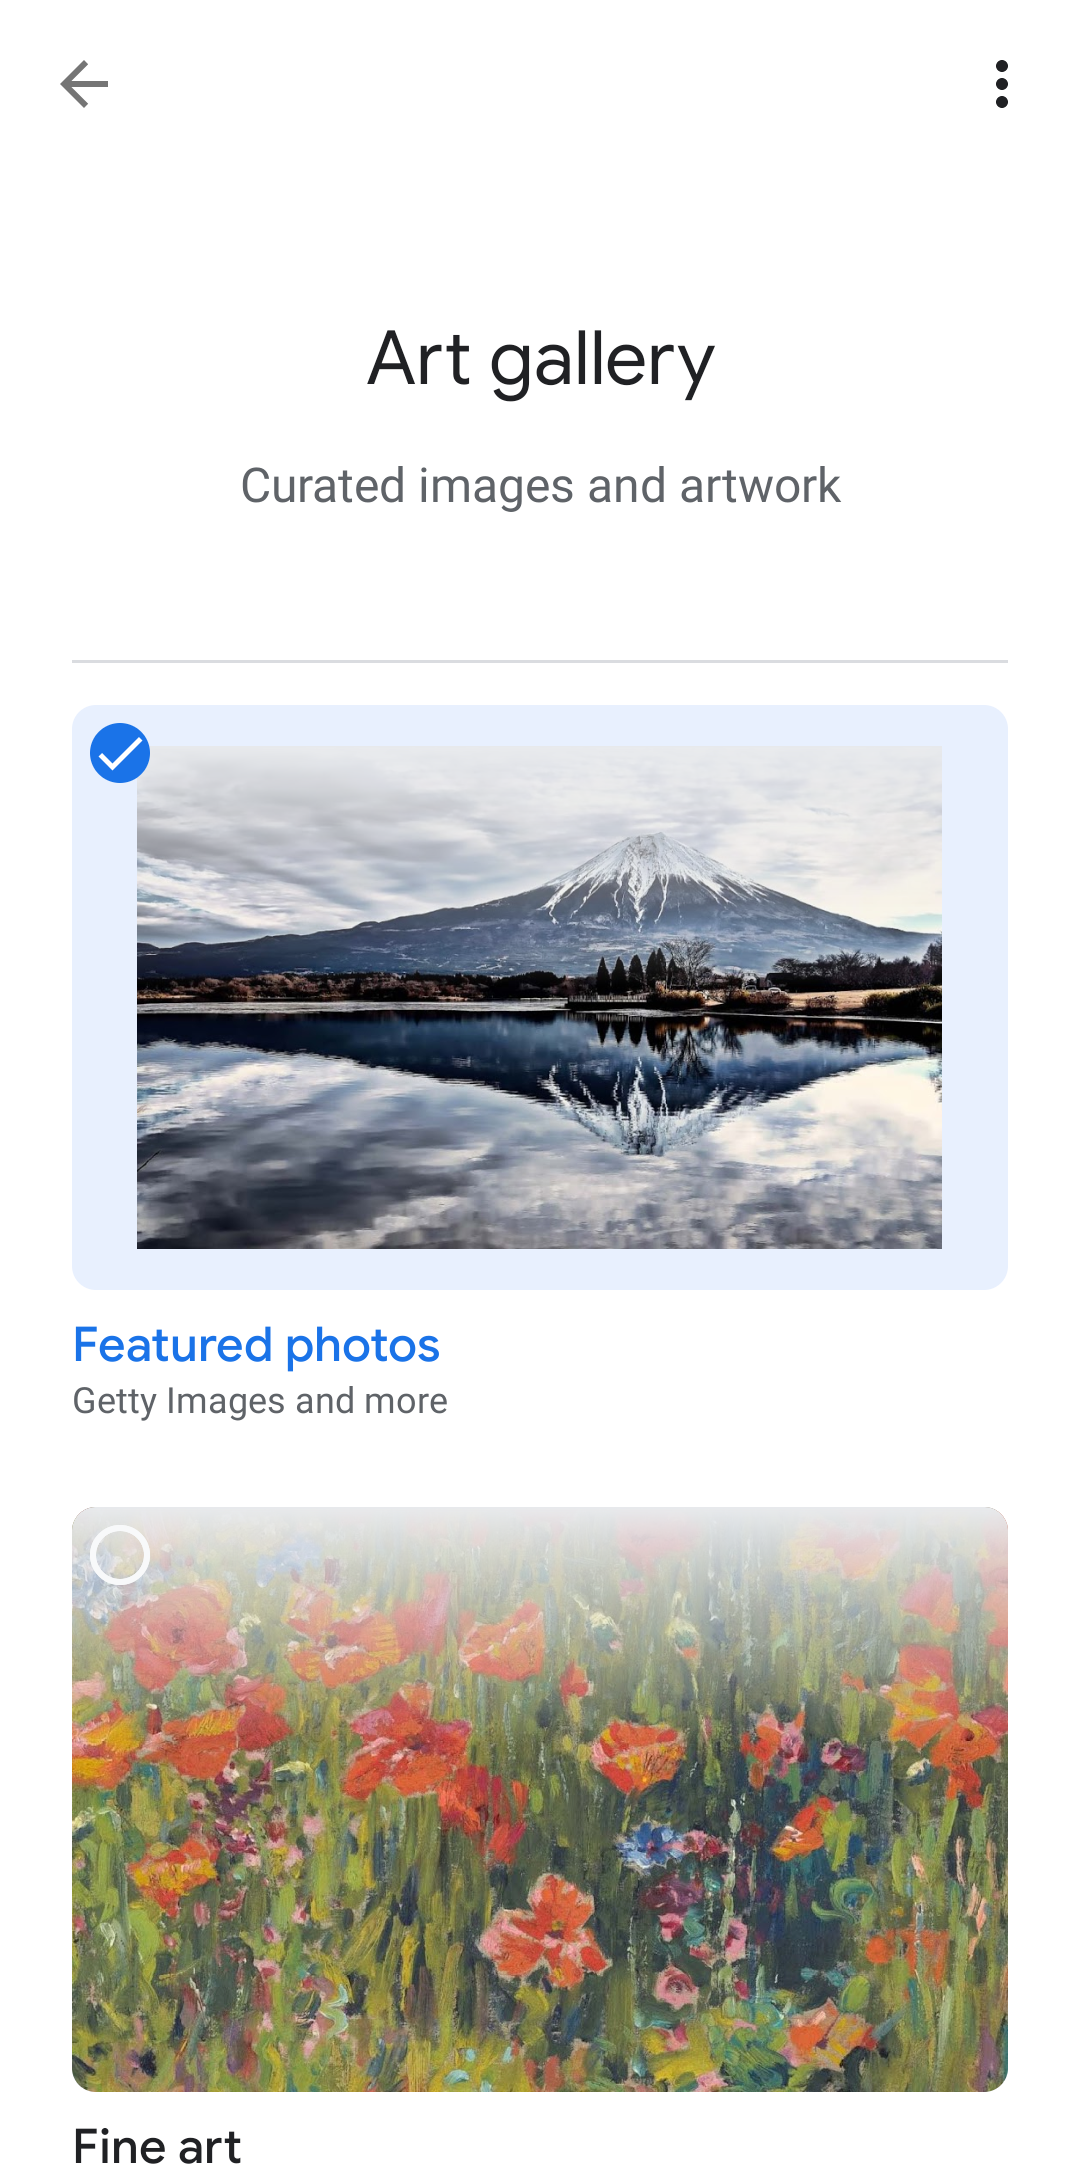 Screenshot shows the Art gallery image display option for in the Google Home app.